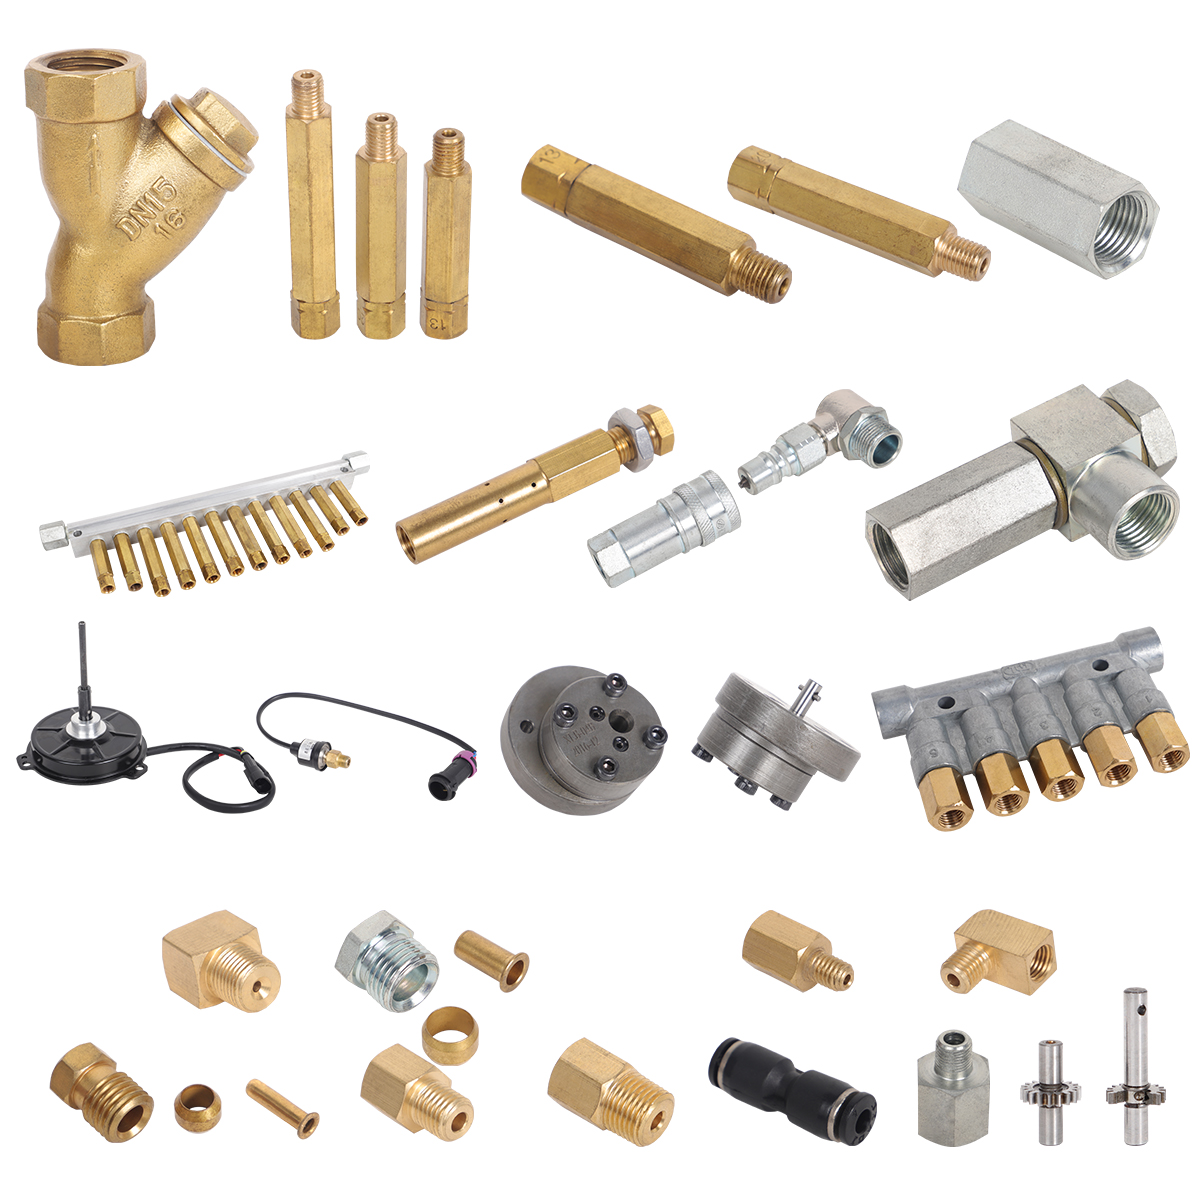 Parts and components for lubrication